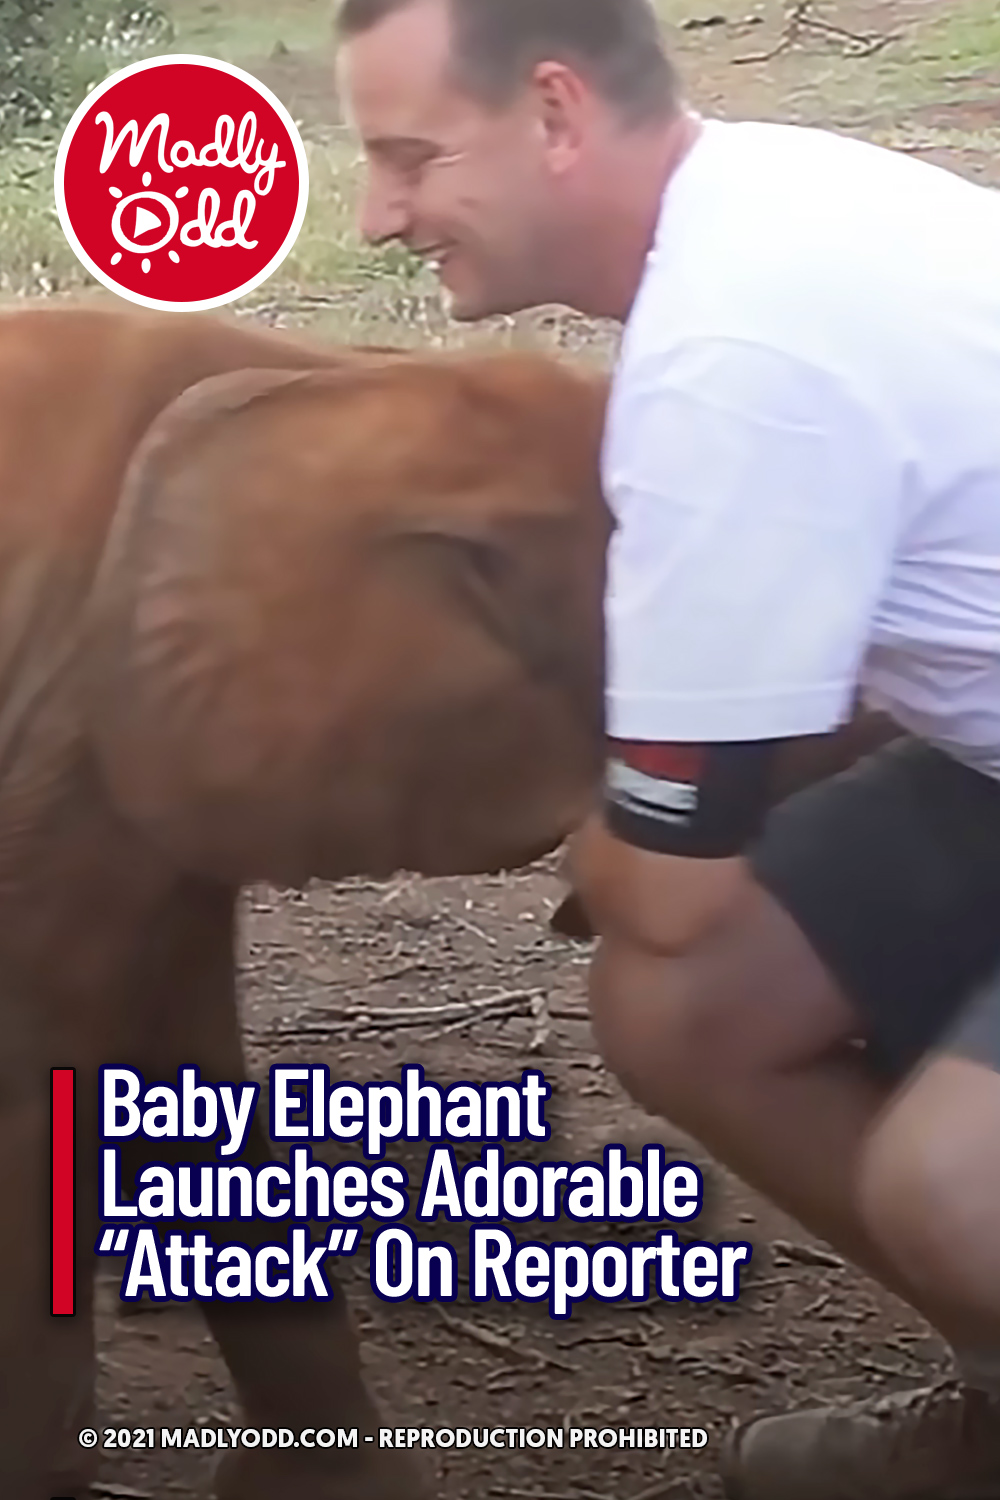 Baby Elephant Launches Adorable “Attack” On Reporter